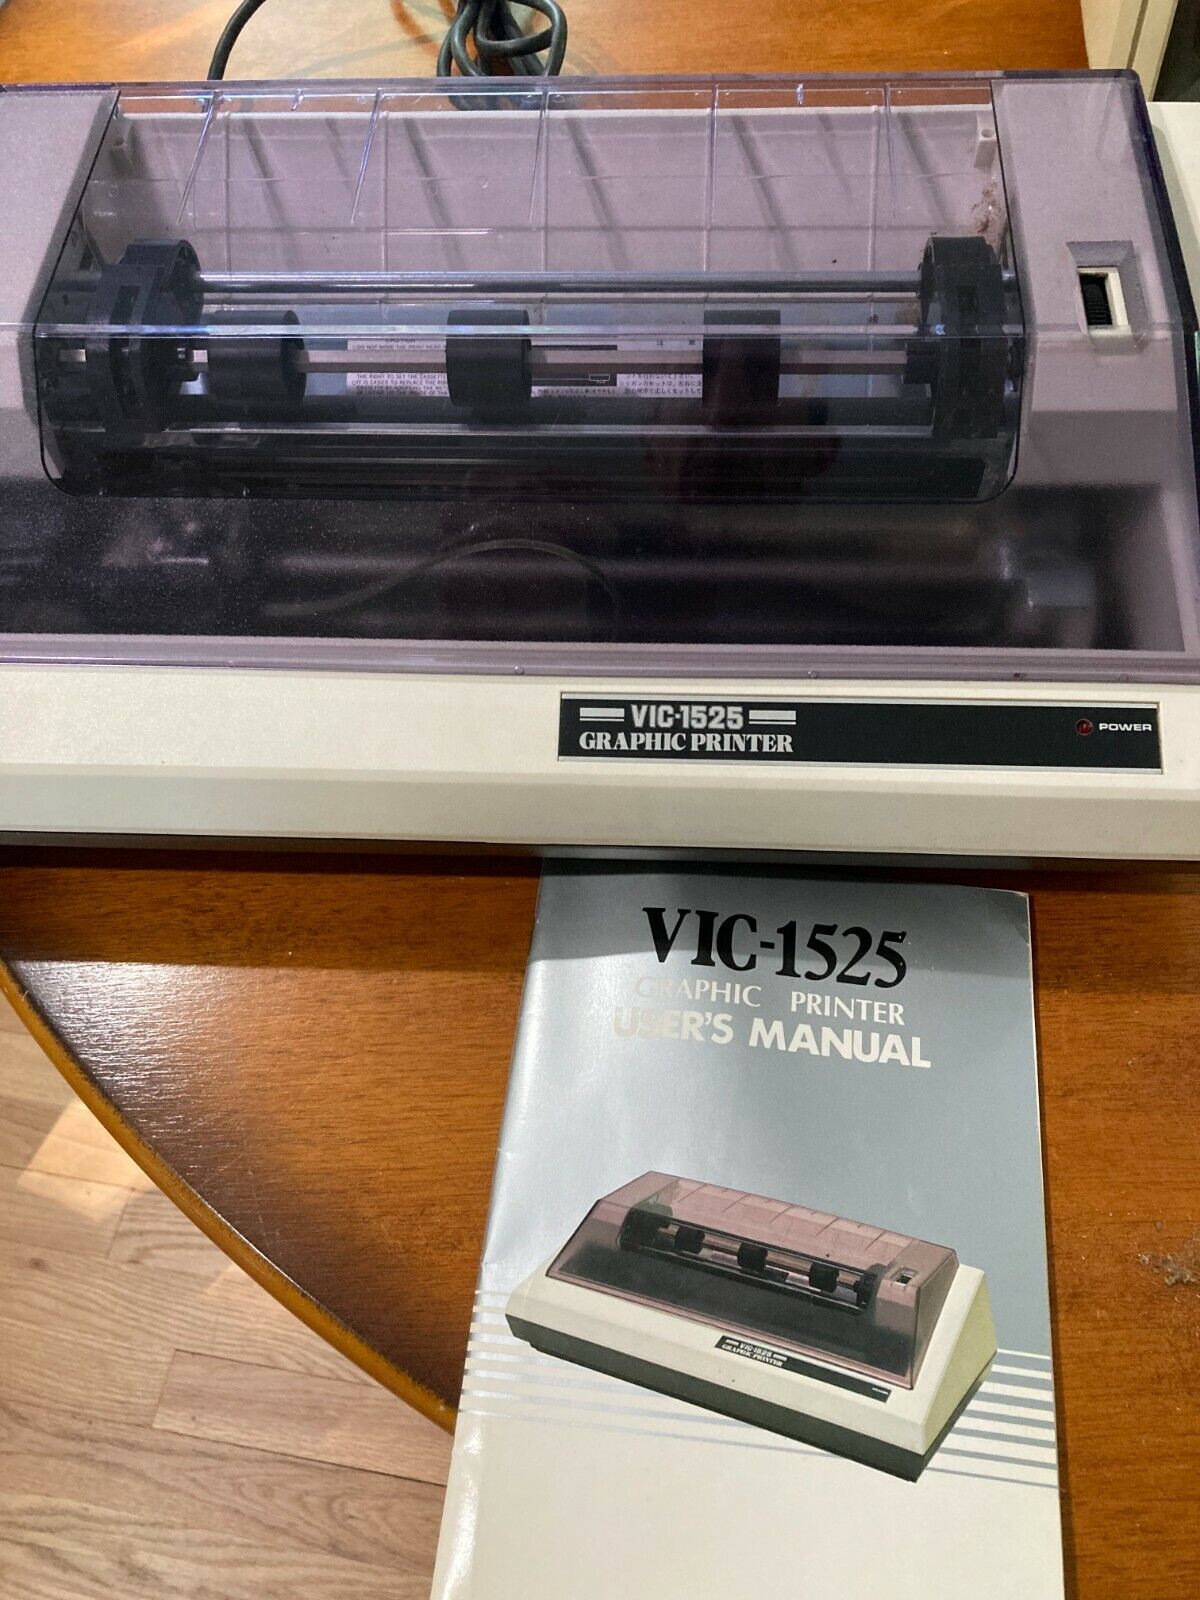 Vintage Commodore VIC-1525 Graphic Printer w/ Manual Powers On